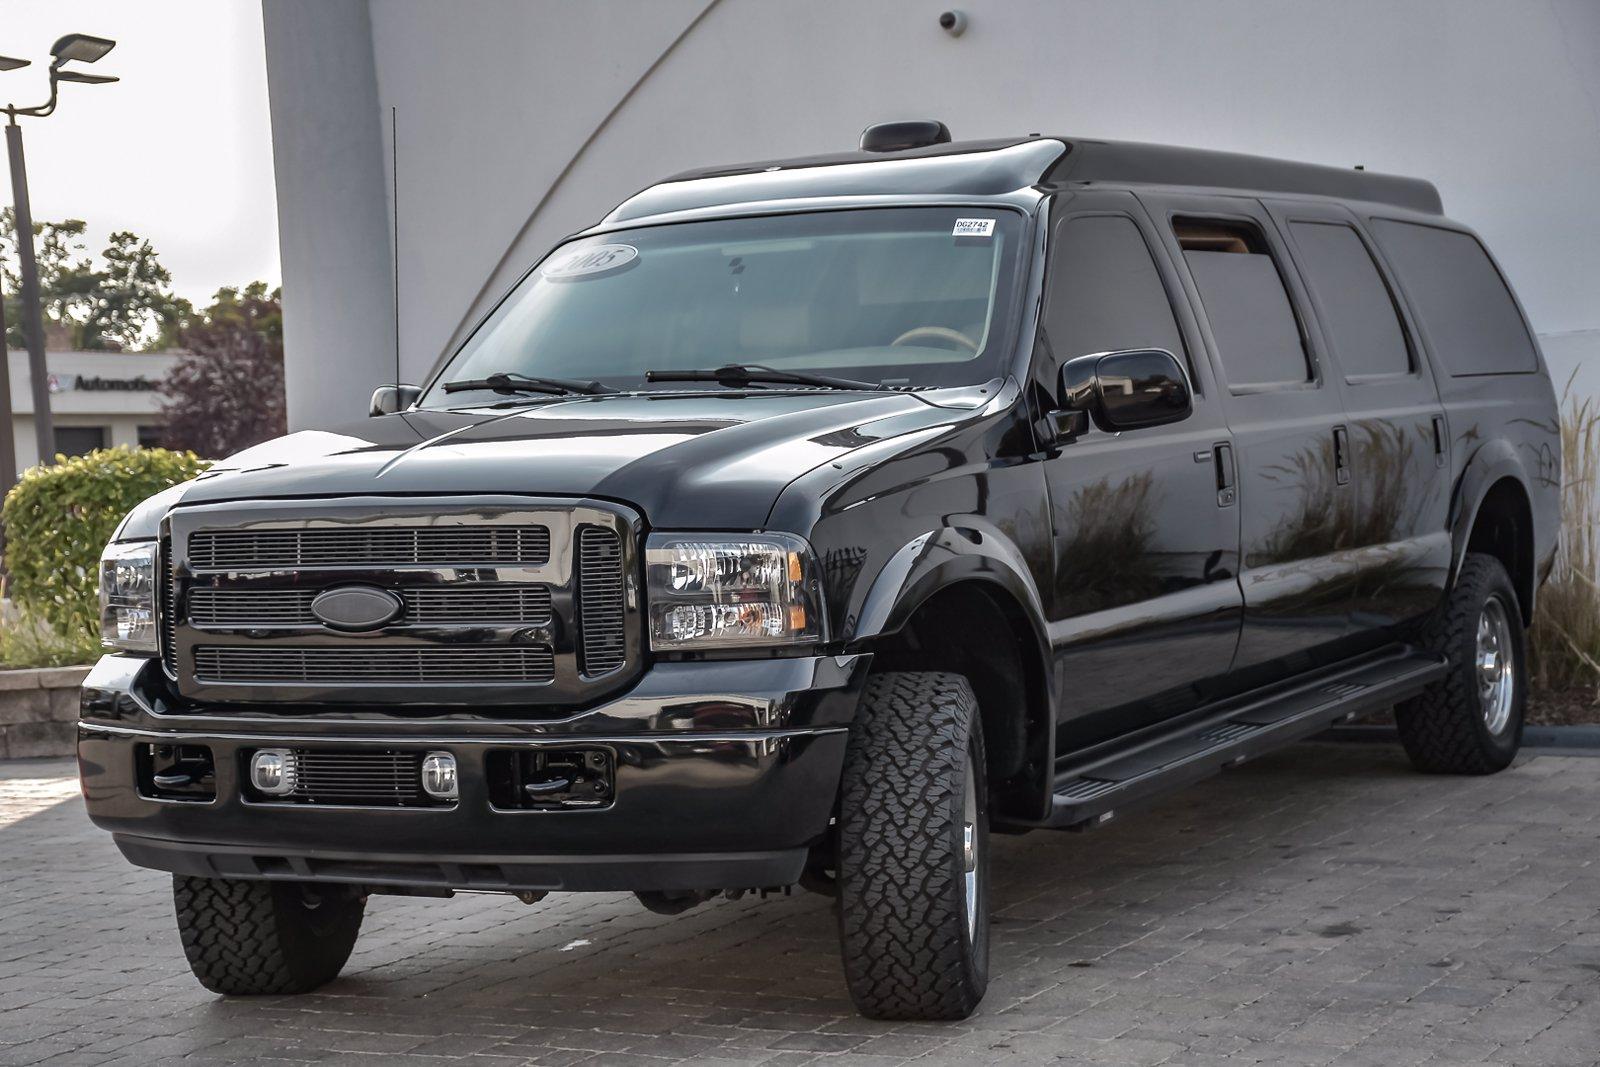 2005 Ford Excursion Armored 6 Door Limousine By Becker Stock Dg2742